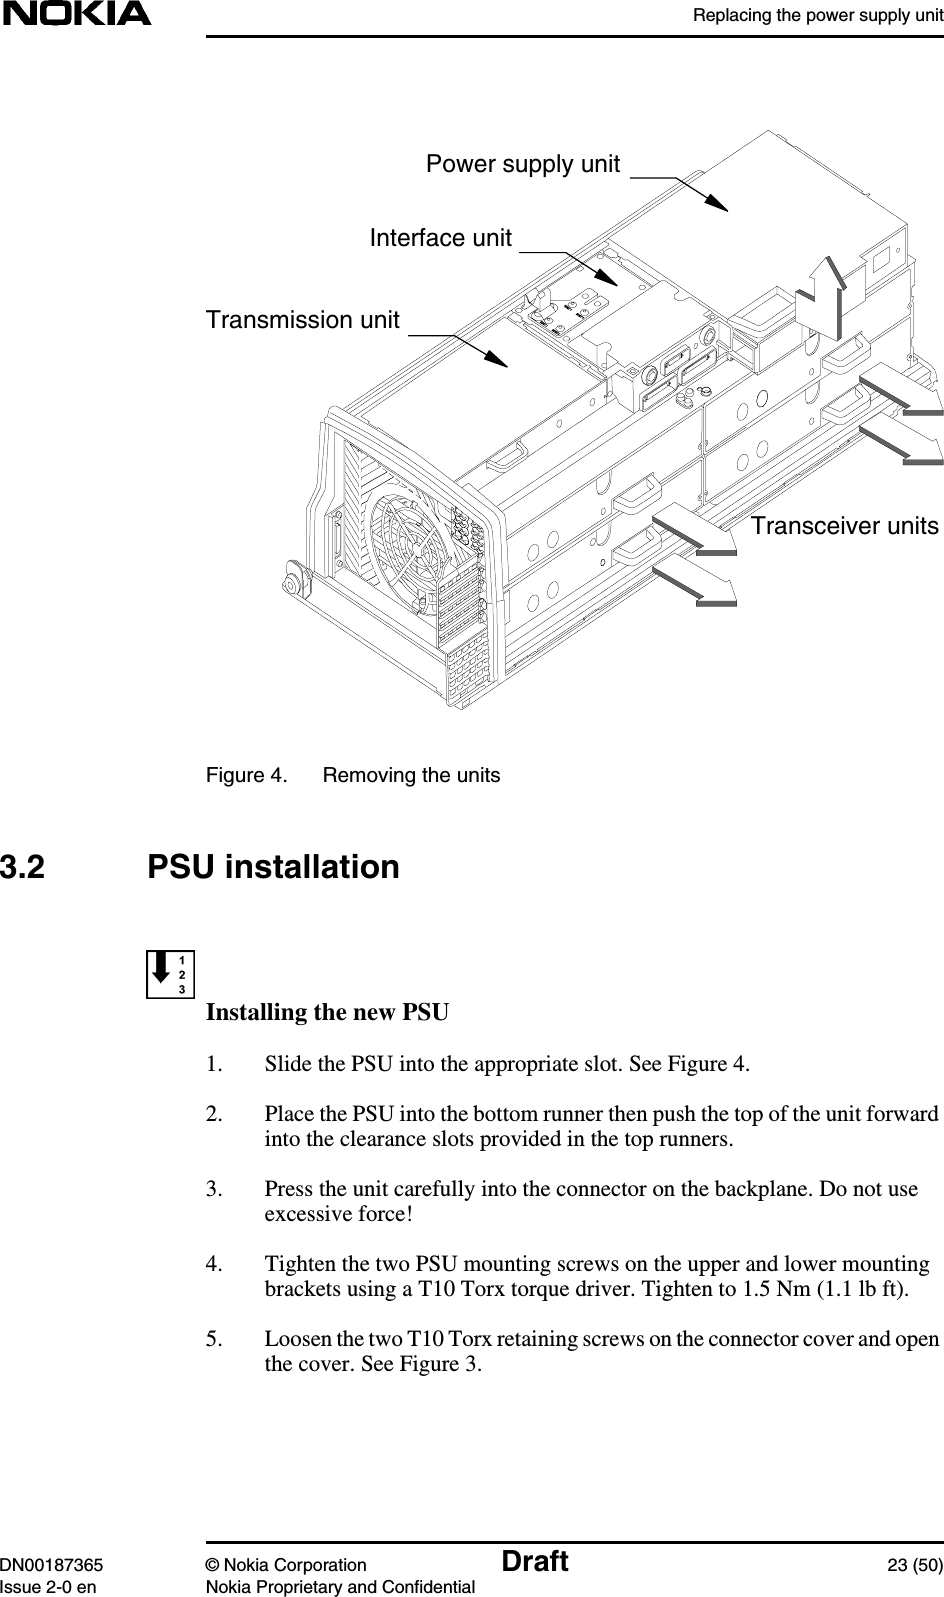 Replacing the power supply unitDN00187365 © Nokia Corporation Draft 23 (50)Issue 2-0 en Nokia Proprietary and ConfidentialFigure 4. Removing the units3.2 PSU installationInstalling the new PSU1. Slide the PSU into the appropriate slot. See Figure 4.2. Place the PSU into the bottom runner then push the top of the unit forwardinto the clearance slots provided in the top runners.3. Press the unit carefully into the connector on the backplane. Do not useexcessive force!4. Tighten the two PSU mounting screws on the upper and lower mountingbrackets using a T10 Torx torque driver. Tighten to 1.5 Nm (1.1 lb ft).5. Loosen the two T10 Torx retaining screws on the connector cover and openthe cover. See Figure 3.Power supply unitInterface unitTransmission unitTransceiver units